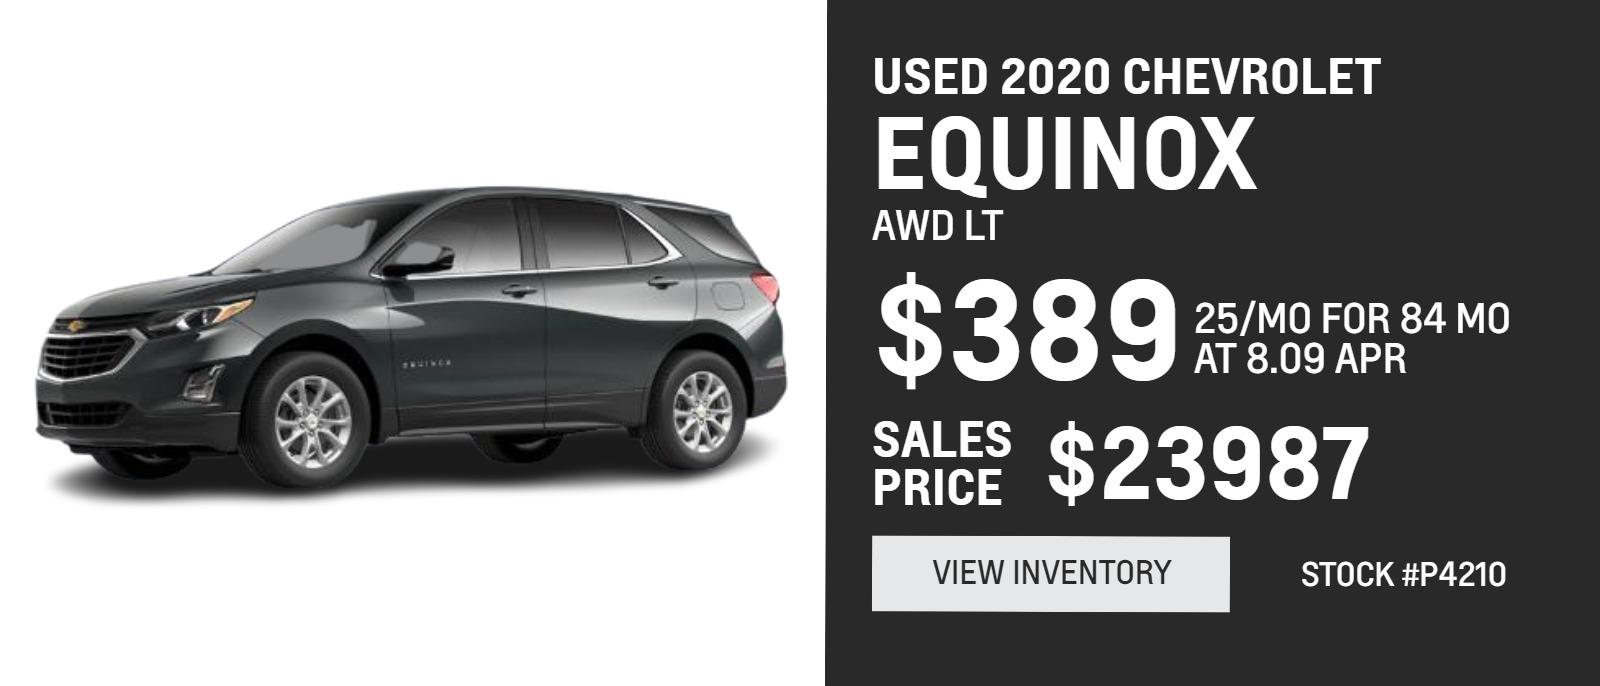 USED 2020 CHEVROLET EQUINOX AWD LT
P4210 $389.25/mo for 84 mo at 8.09 APR with a sale price of $23987